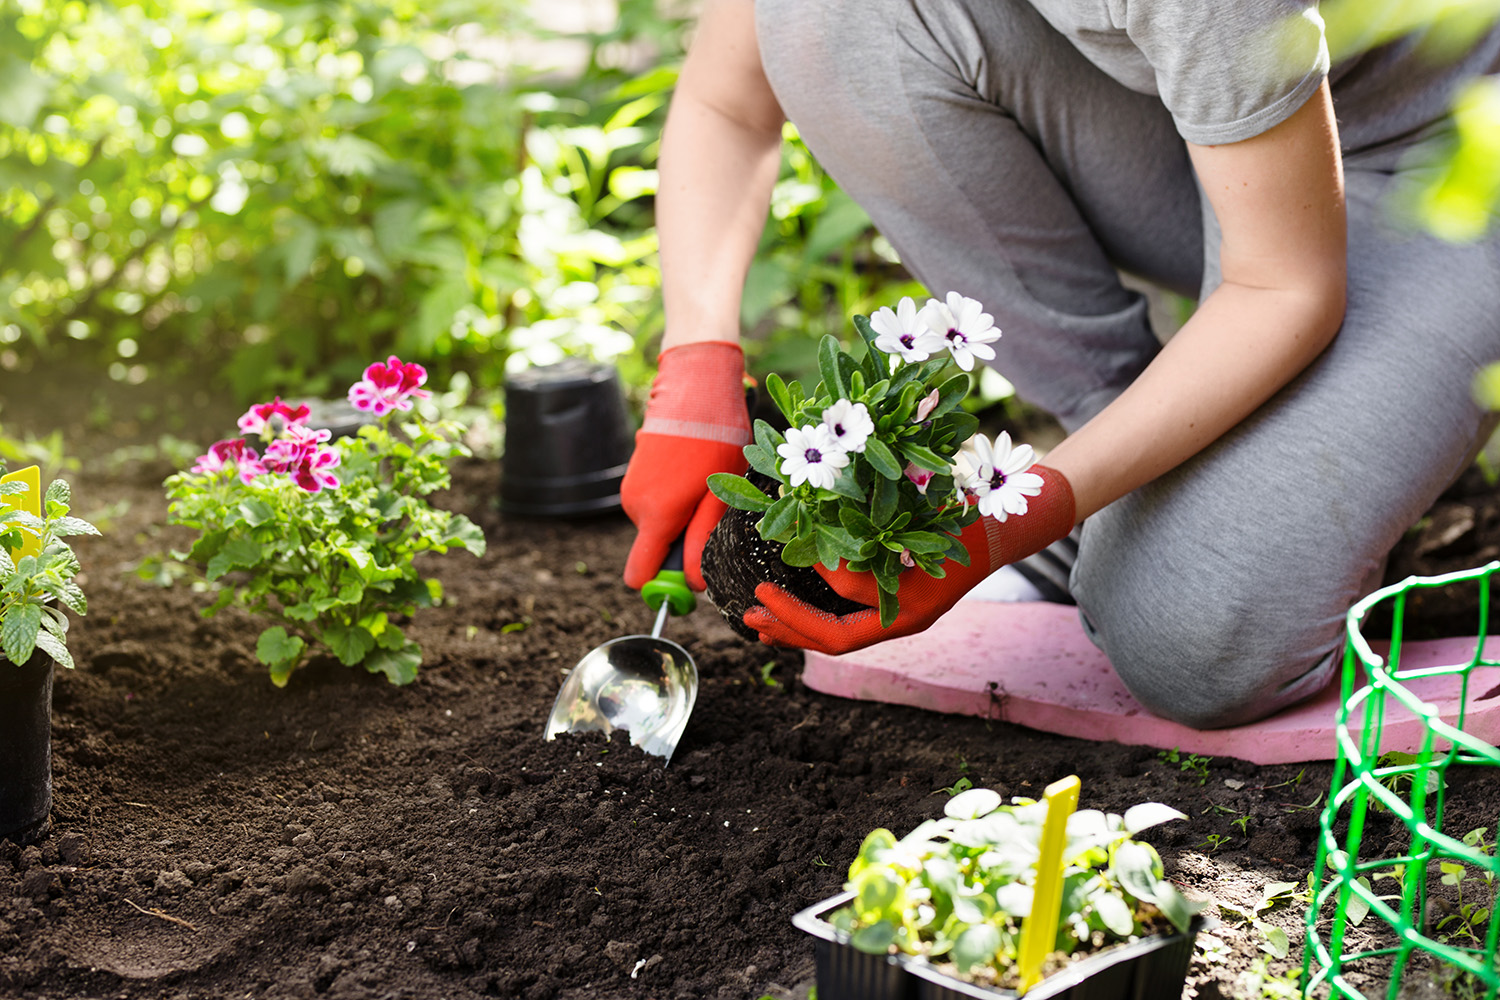 Turning point When is it safe to plant your garden? The Daily